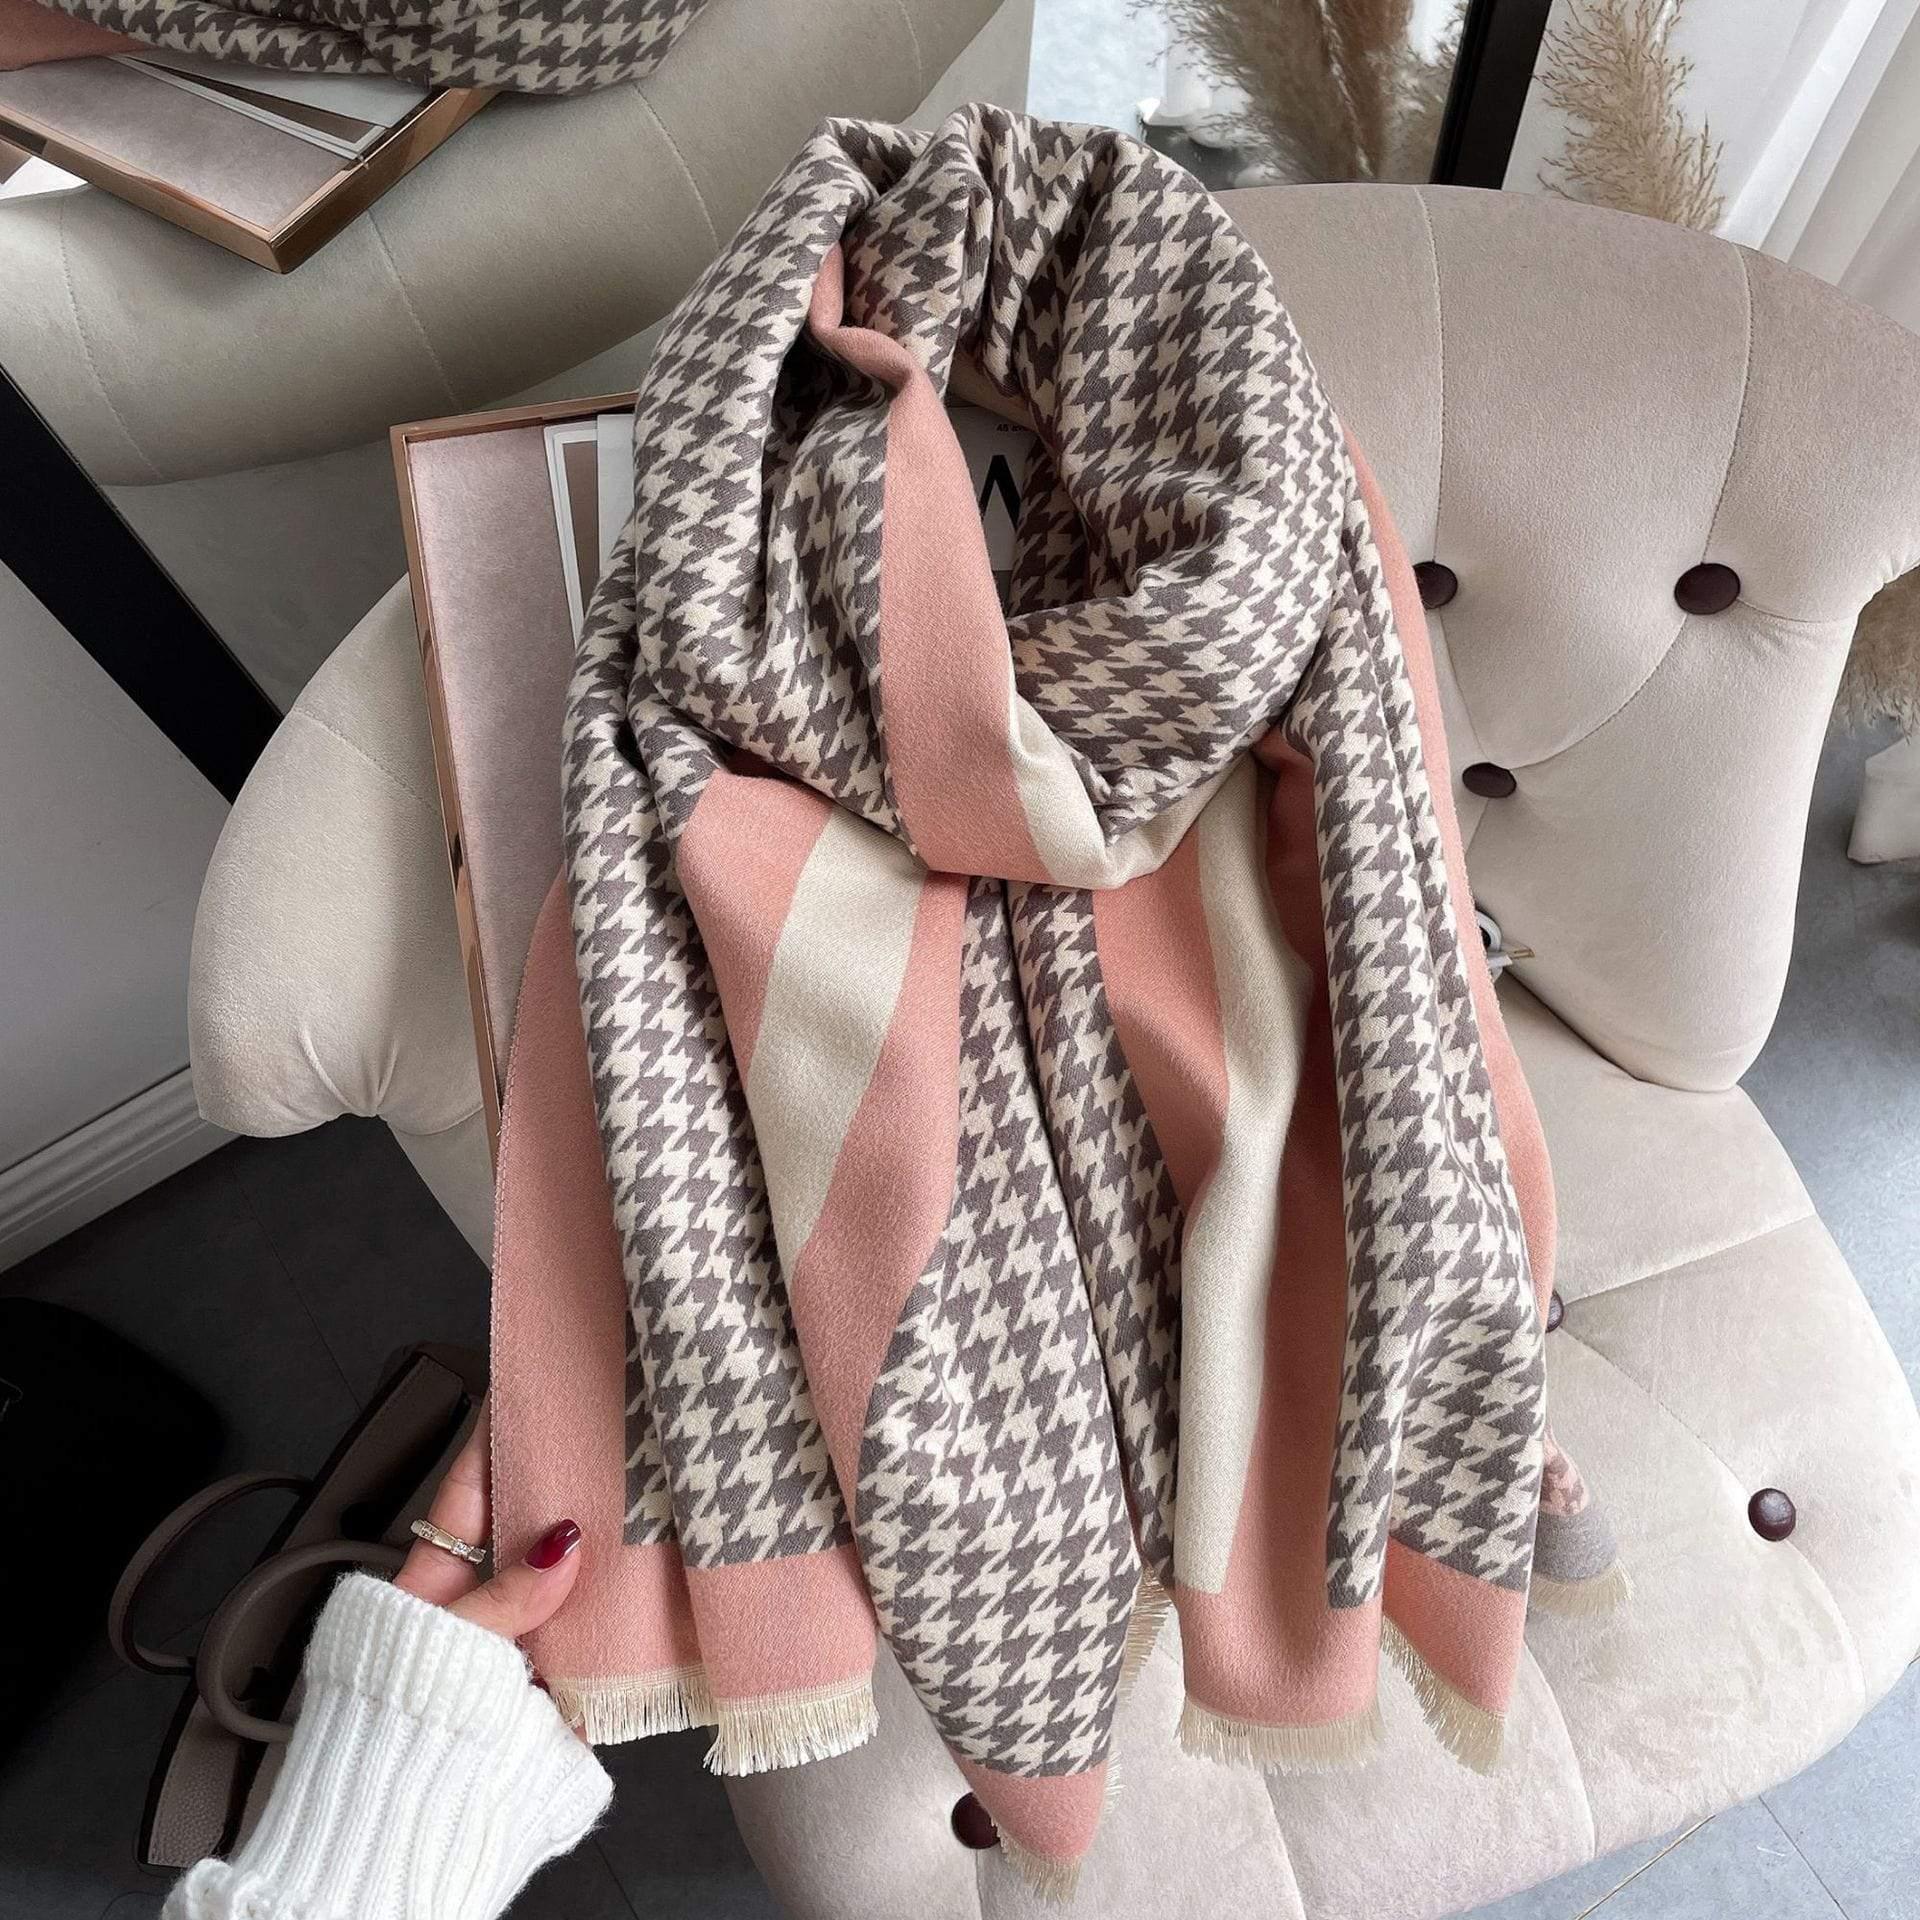 Shop 0 Thick Warm Winter Scarf Houndstooth Design Print Women Cashmere Pashmina Shawl Lady Wrap Scarves Knitted Female Foulard Blanket Mademoiselle Home Decor